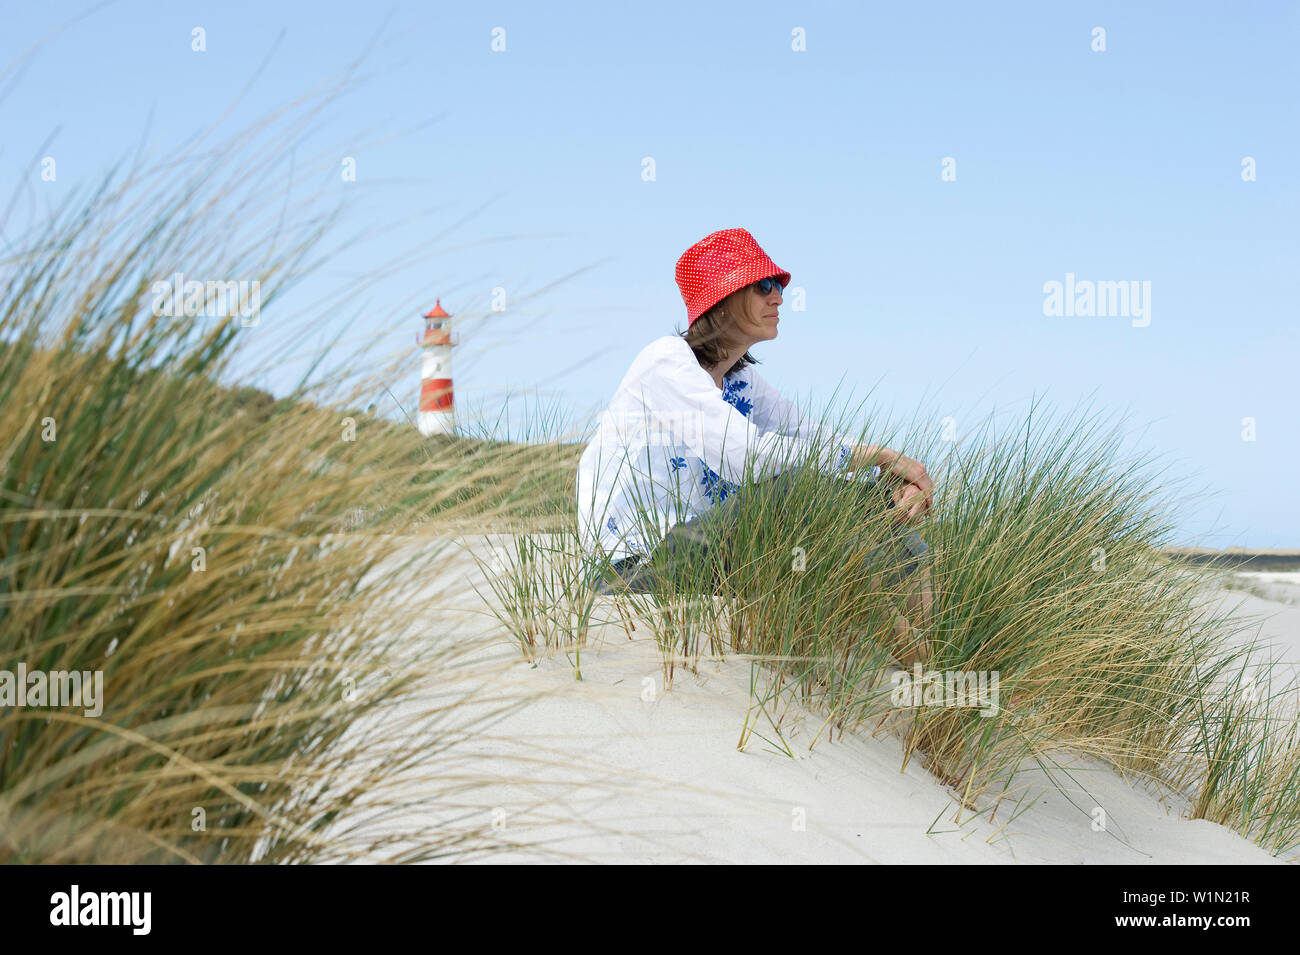 Woman wearing a red hut sitting at beach, List-Ost lighthouse in background, Ellenbogen, List, Sylt, Schleswig-Holstein, Germany Stock Photo